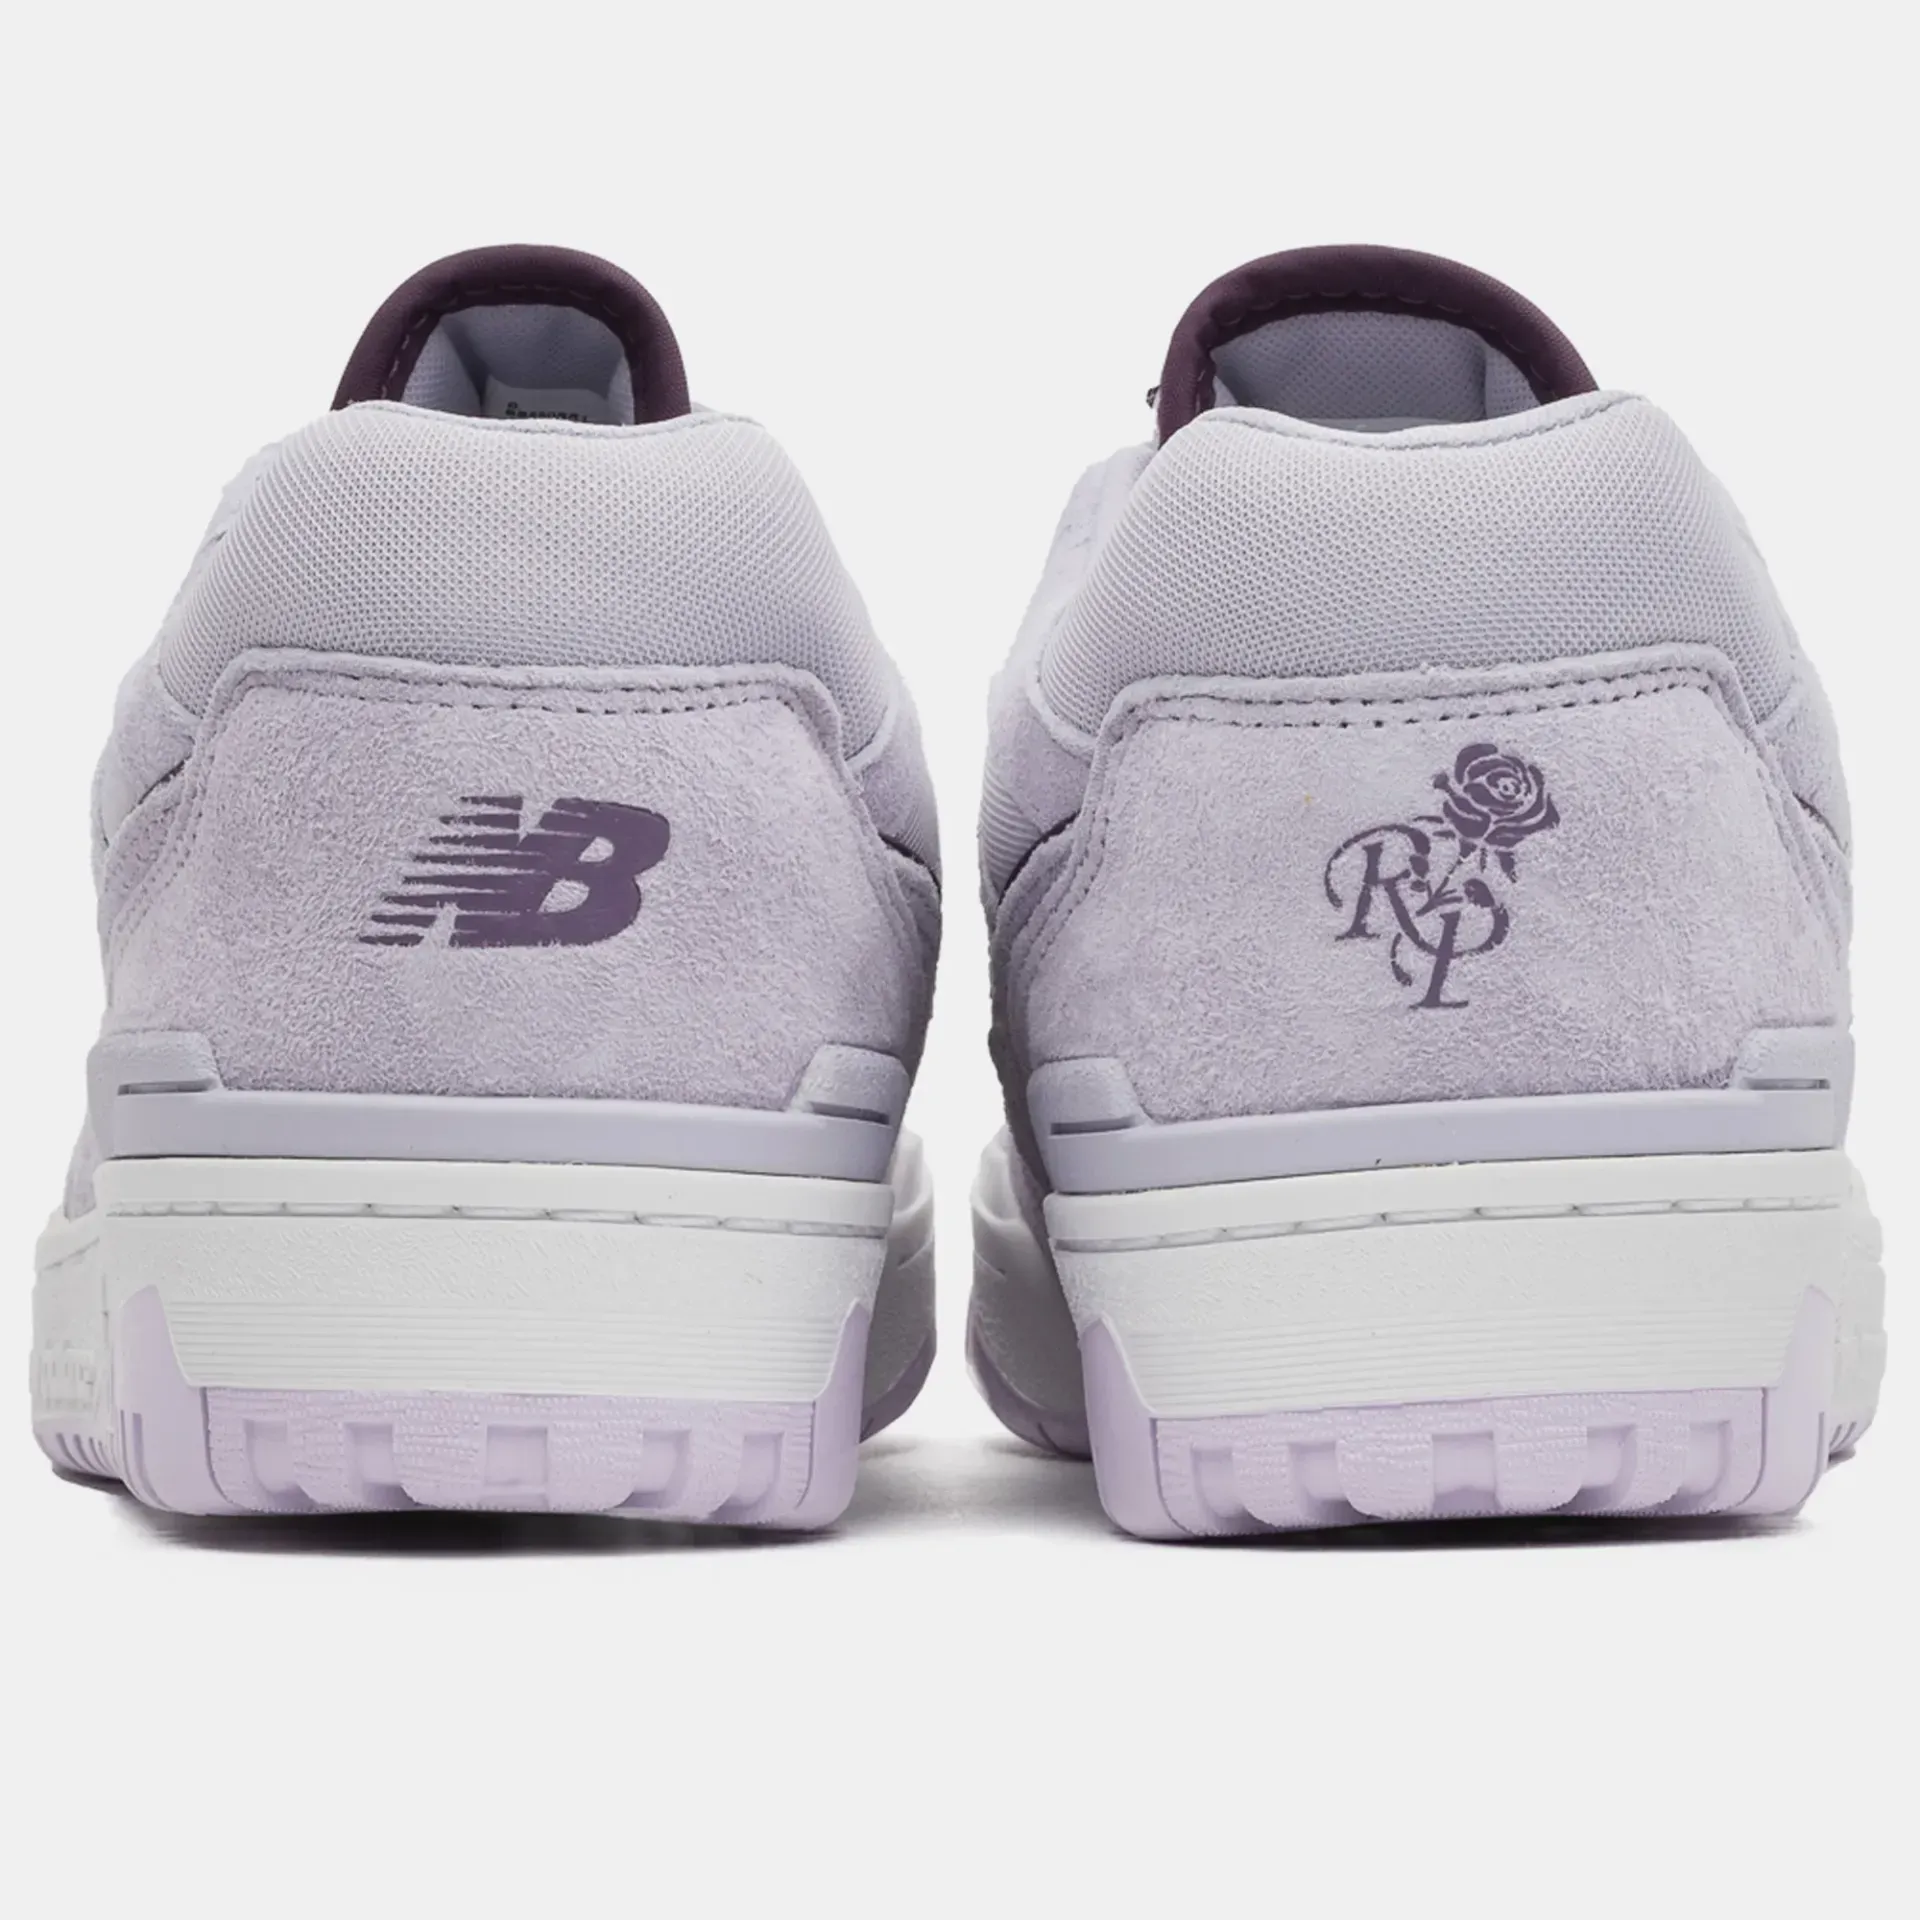 Rich Paul New Balance 550 Forever Yours Bb550rr1 6